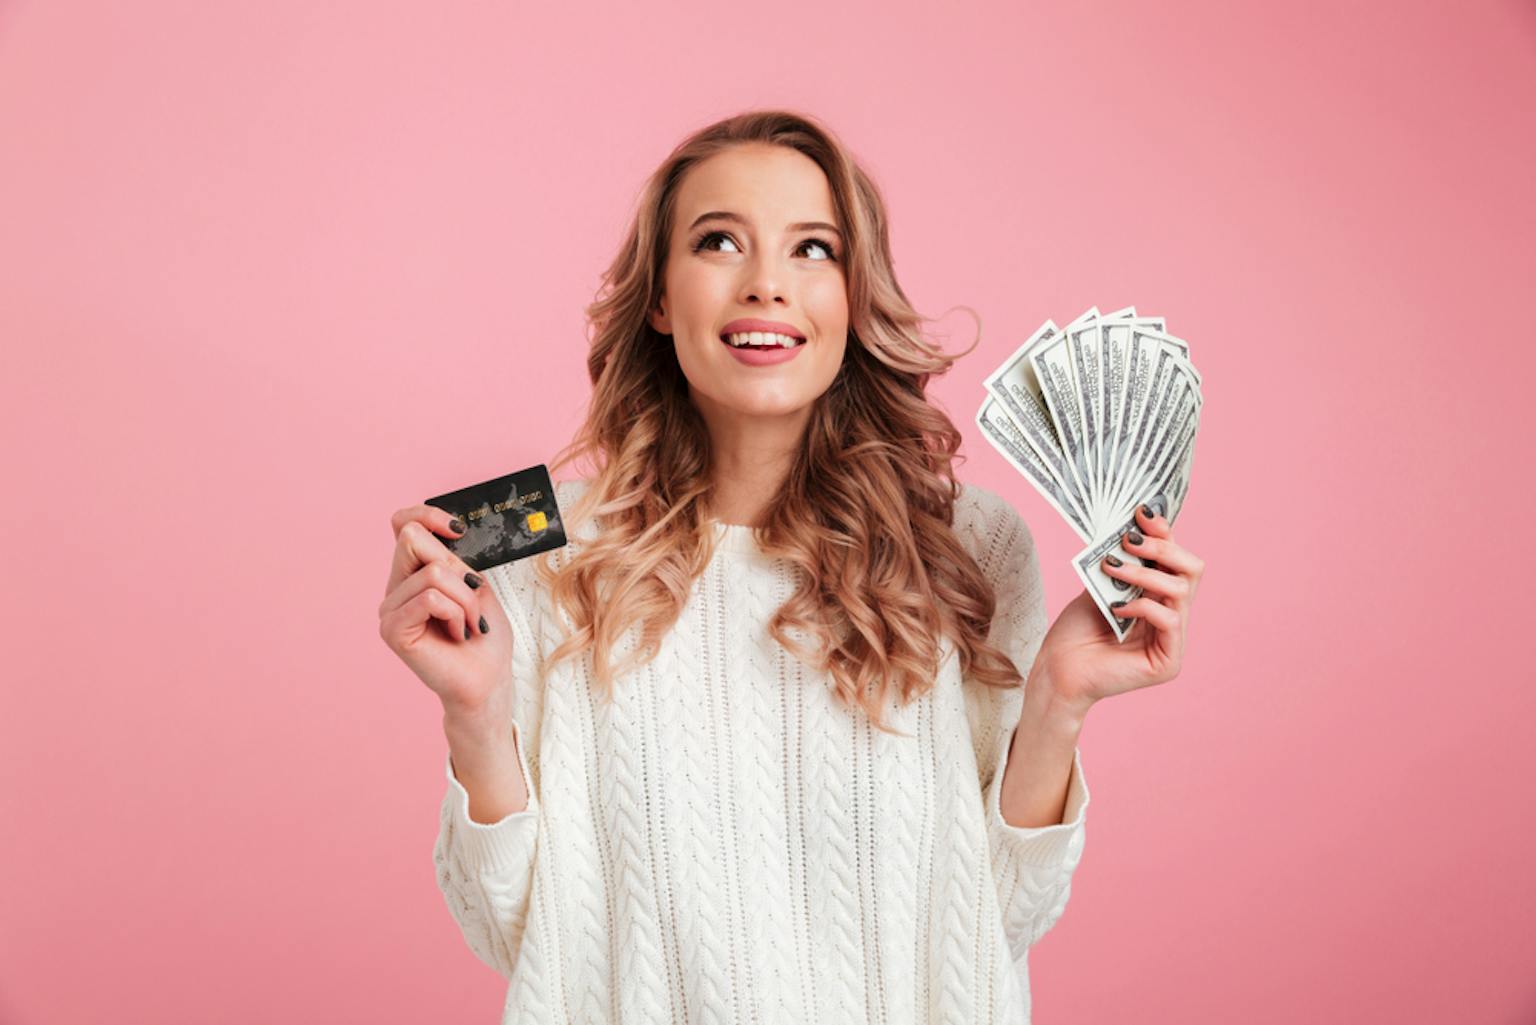 Cash vs Credit Card: Stuck Between These Two - Which Should I Use?